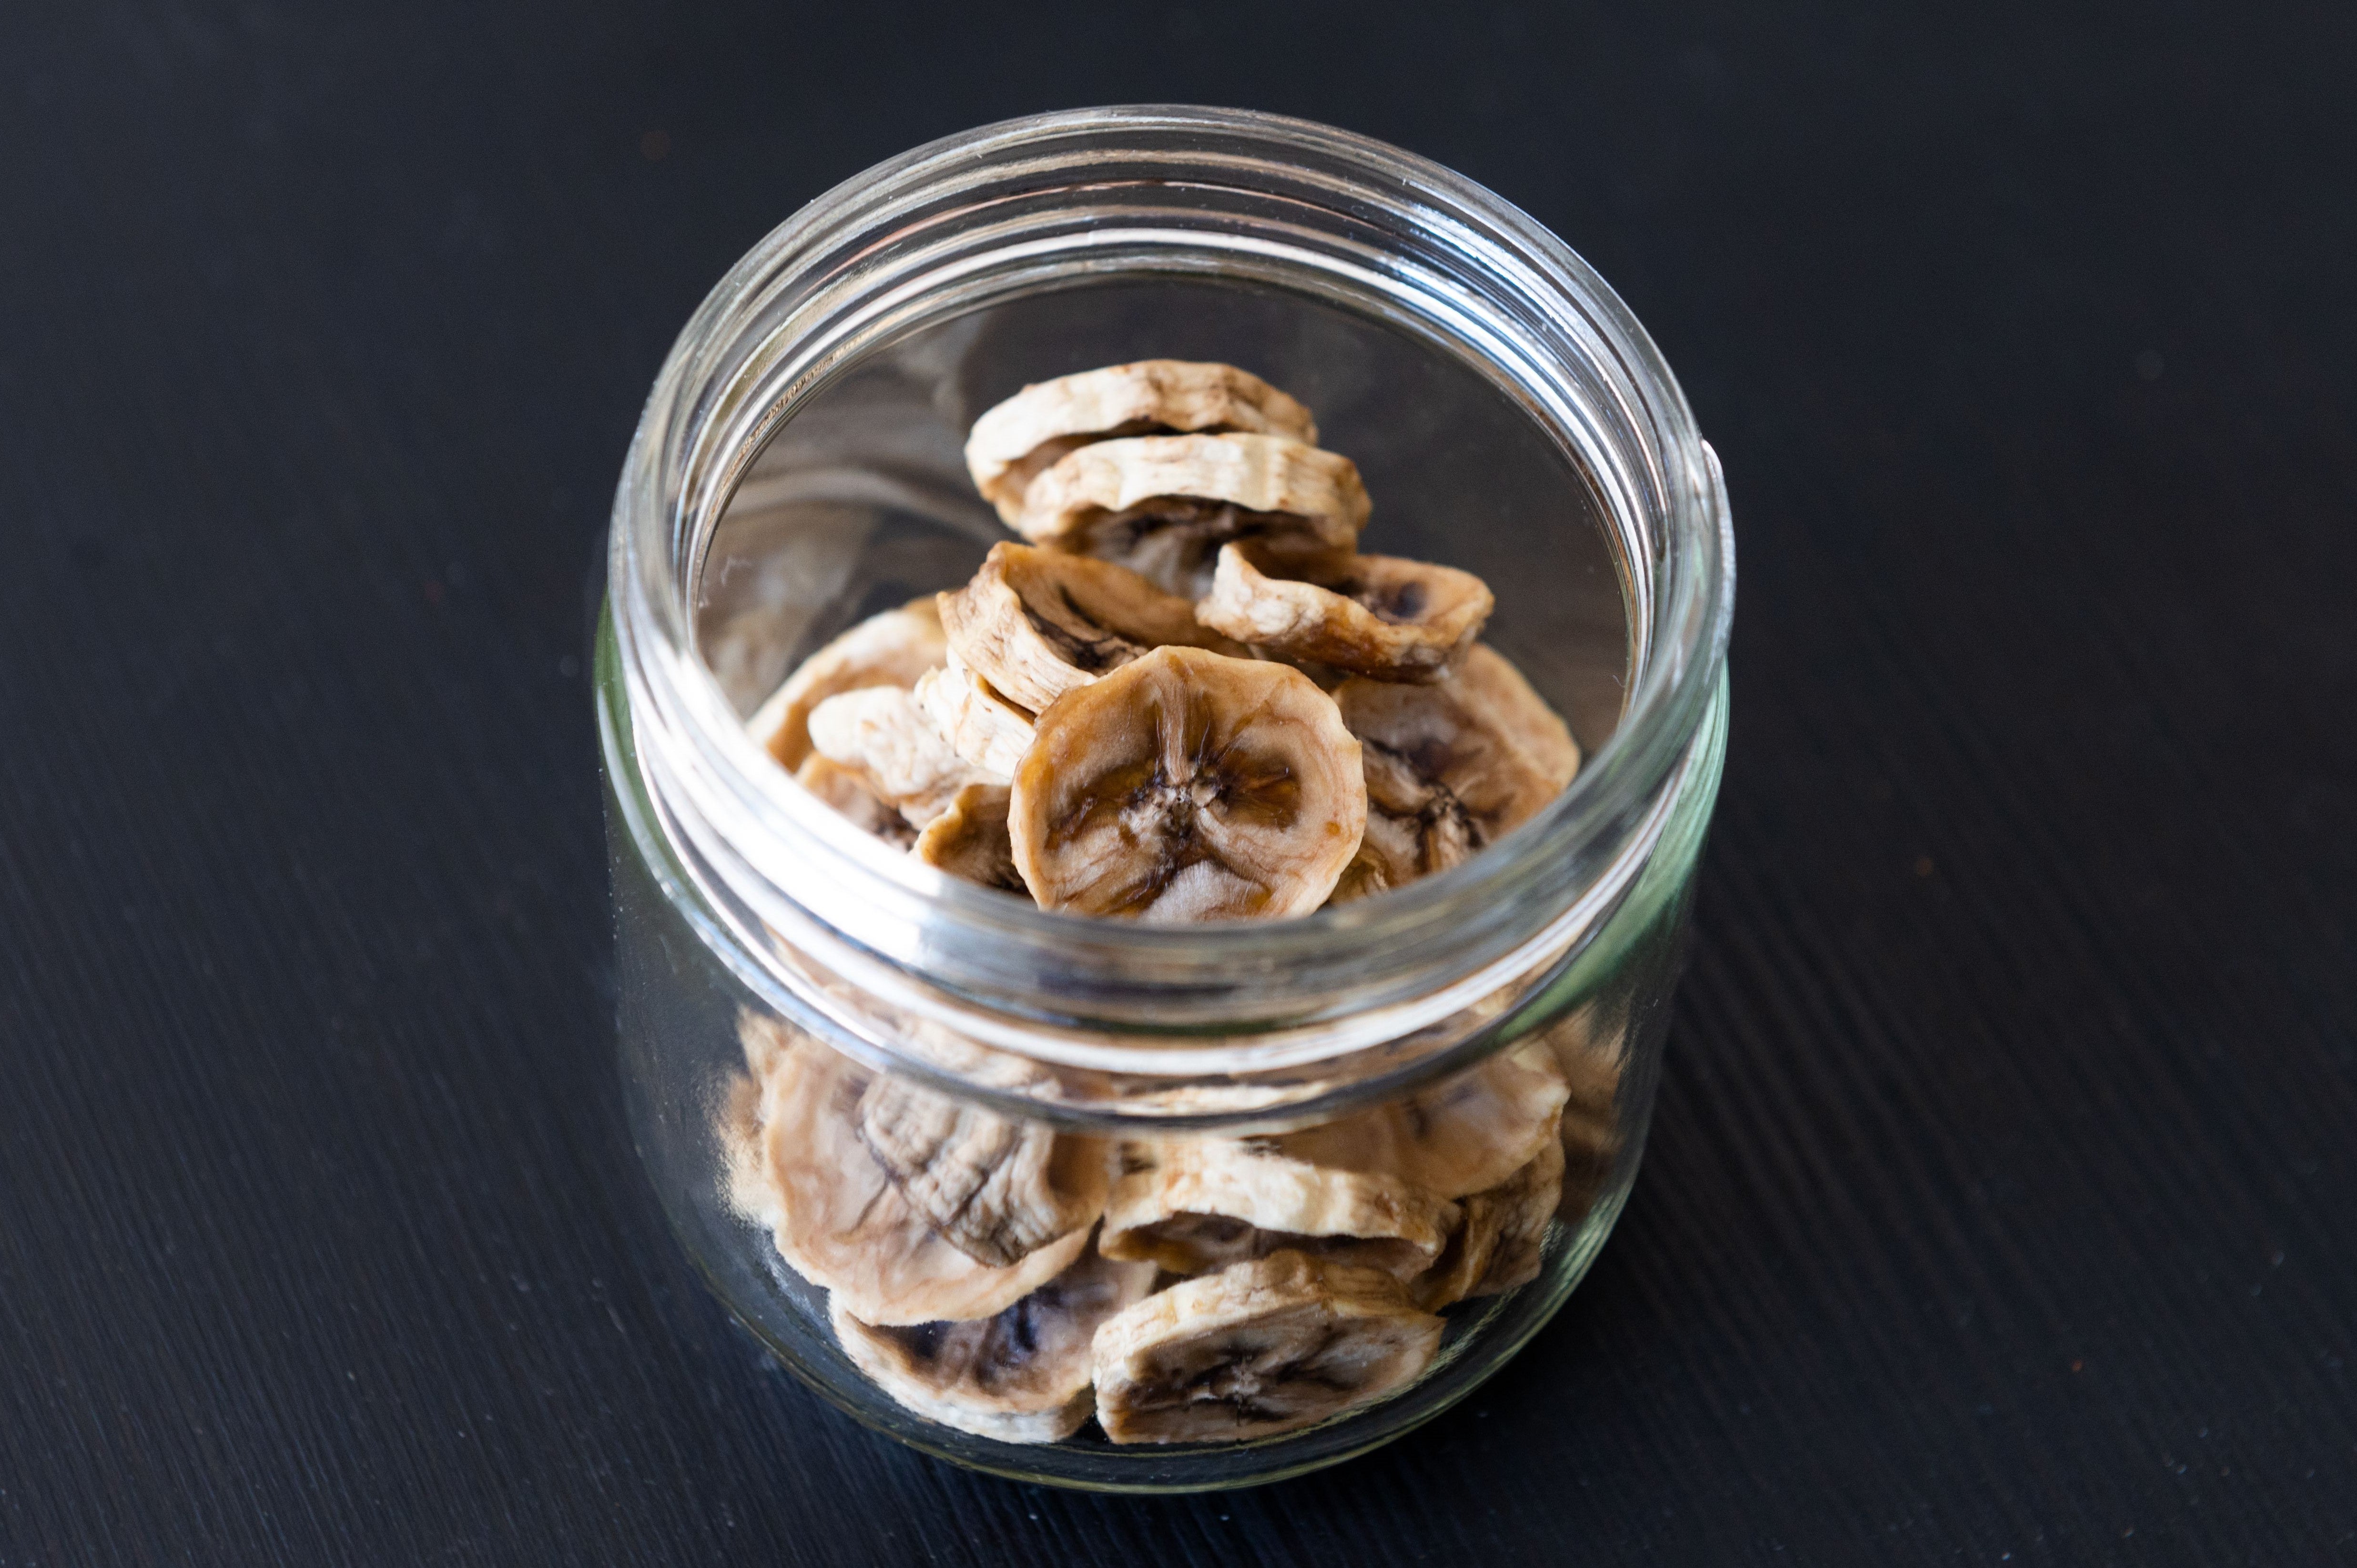 Dried candy banana medallions in a jar